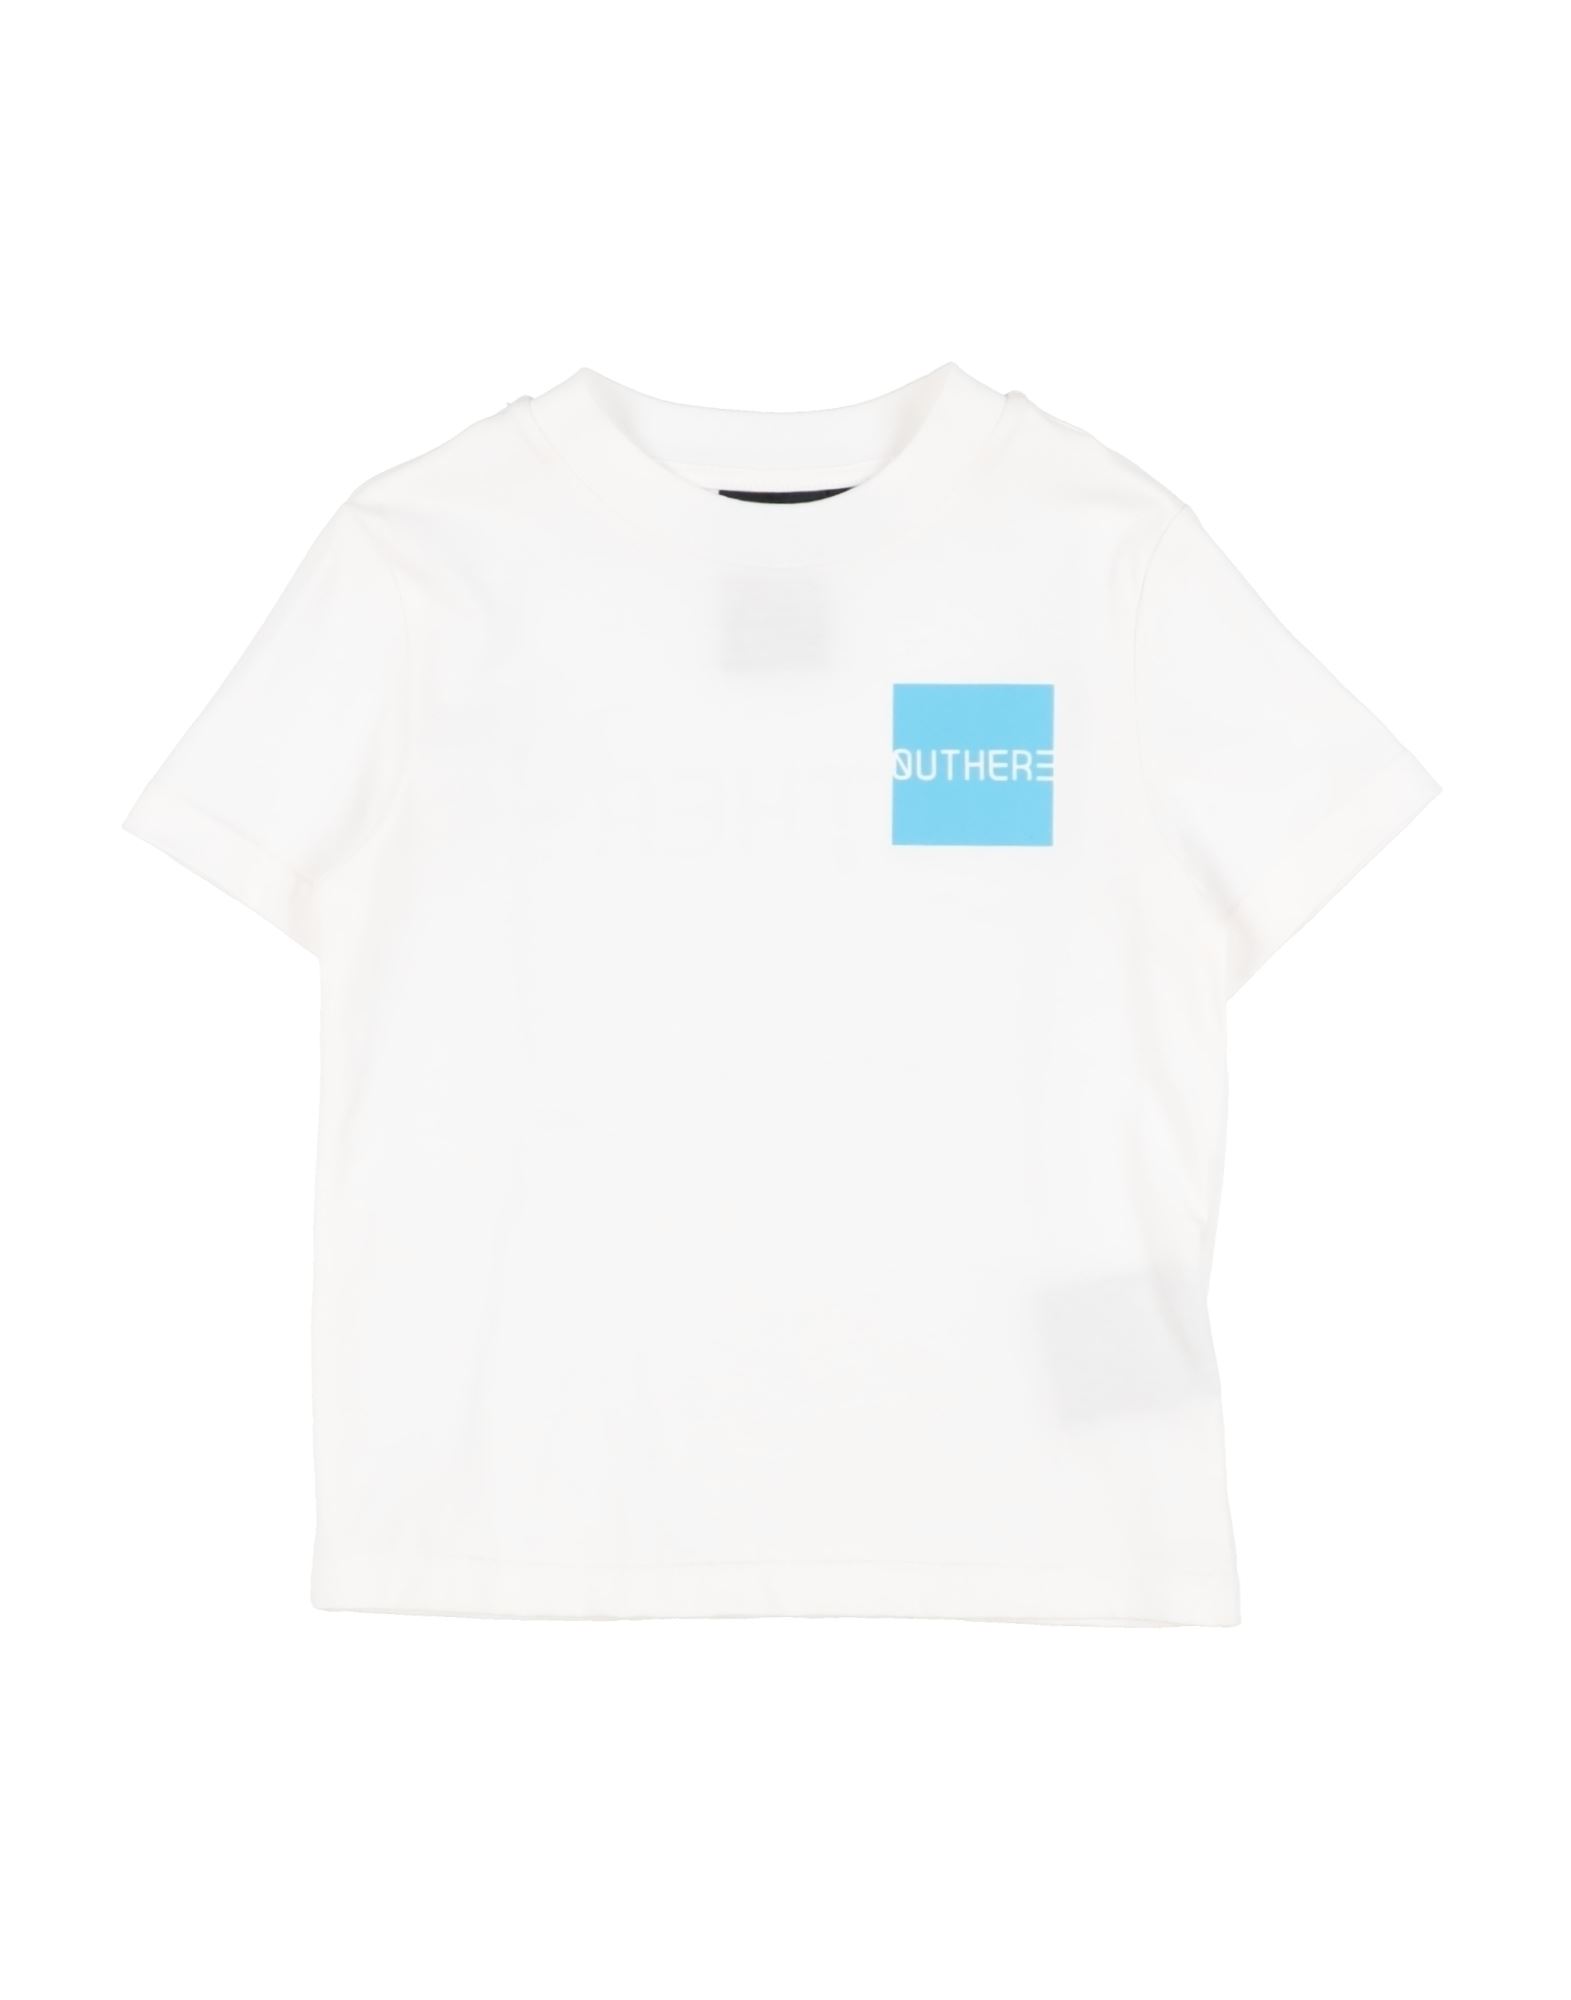 OUTHERE T-shirts Kinder Weiß von OUTHERE